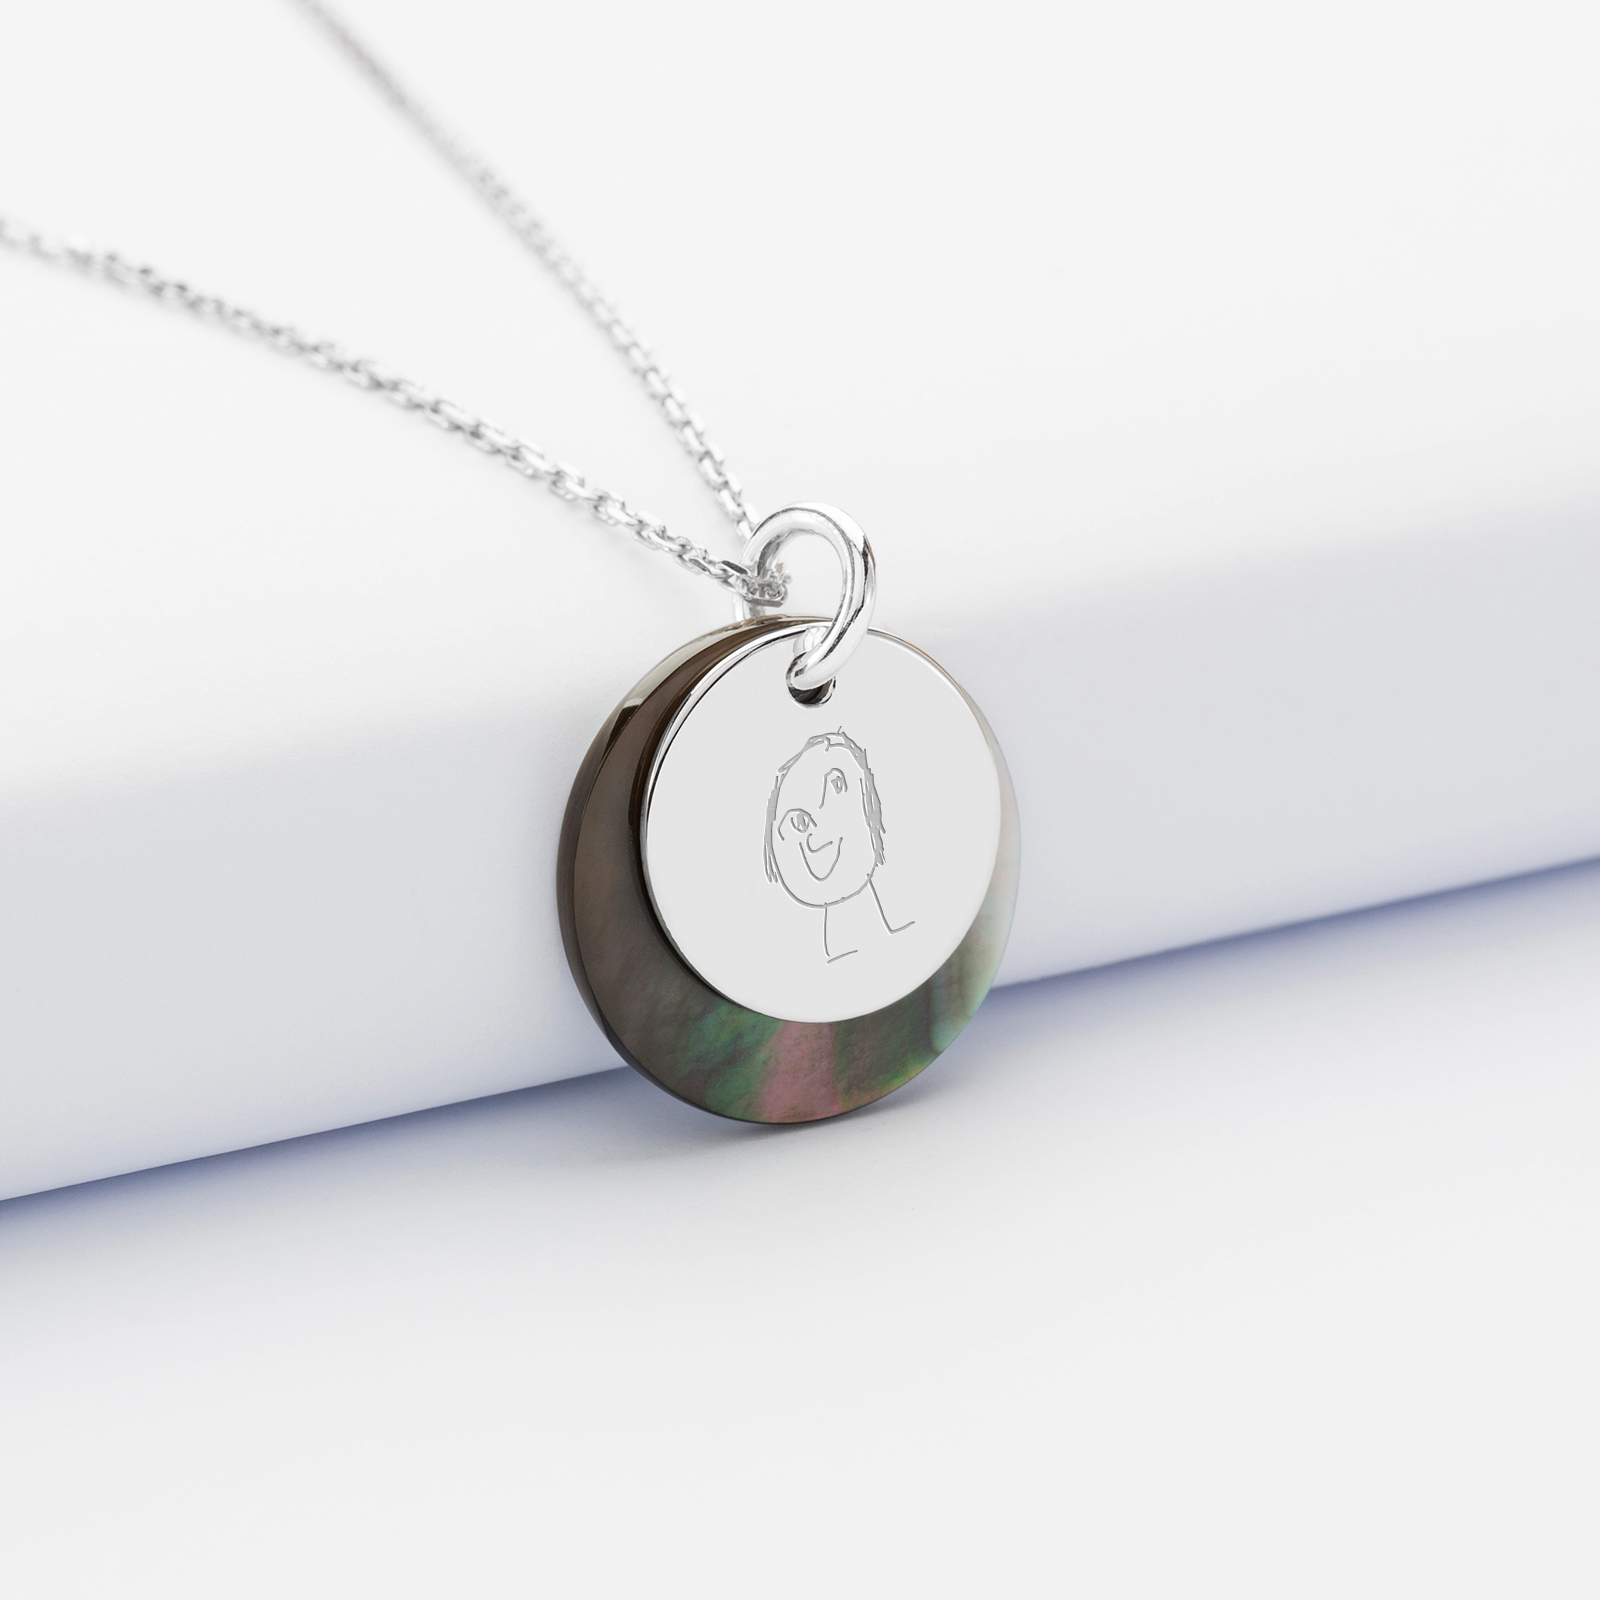 Personalised mother of pearl 19 mm pendant charm and engraved silver medallion 15 mm - sketch